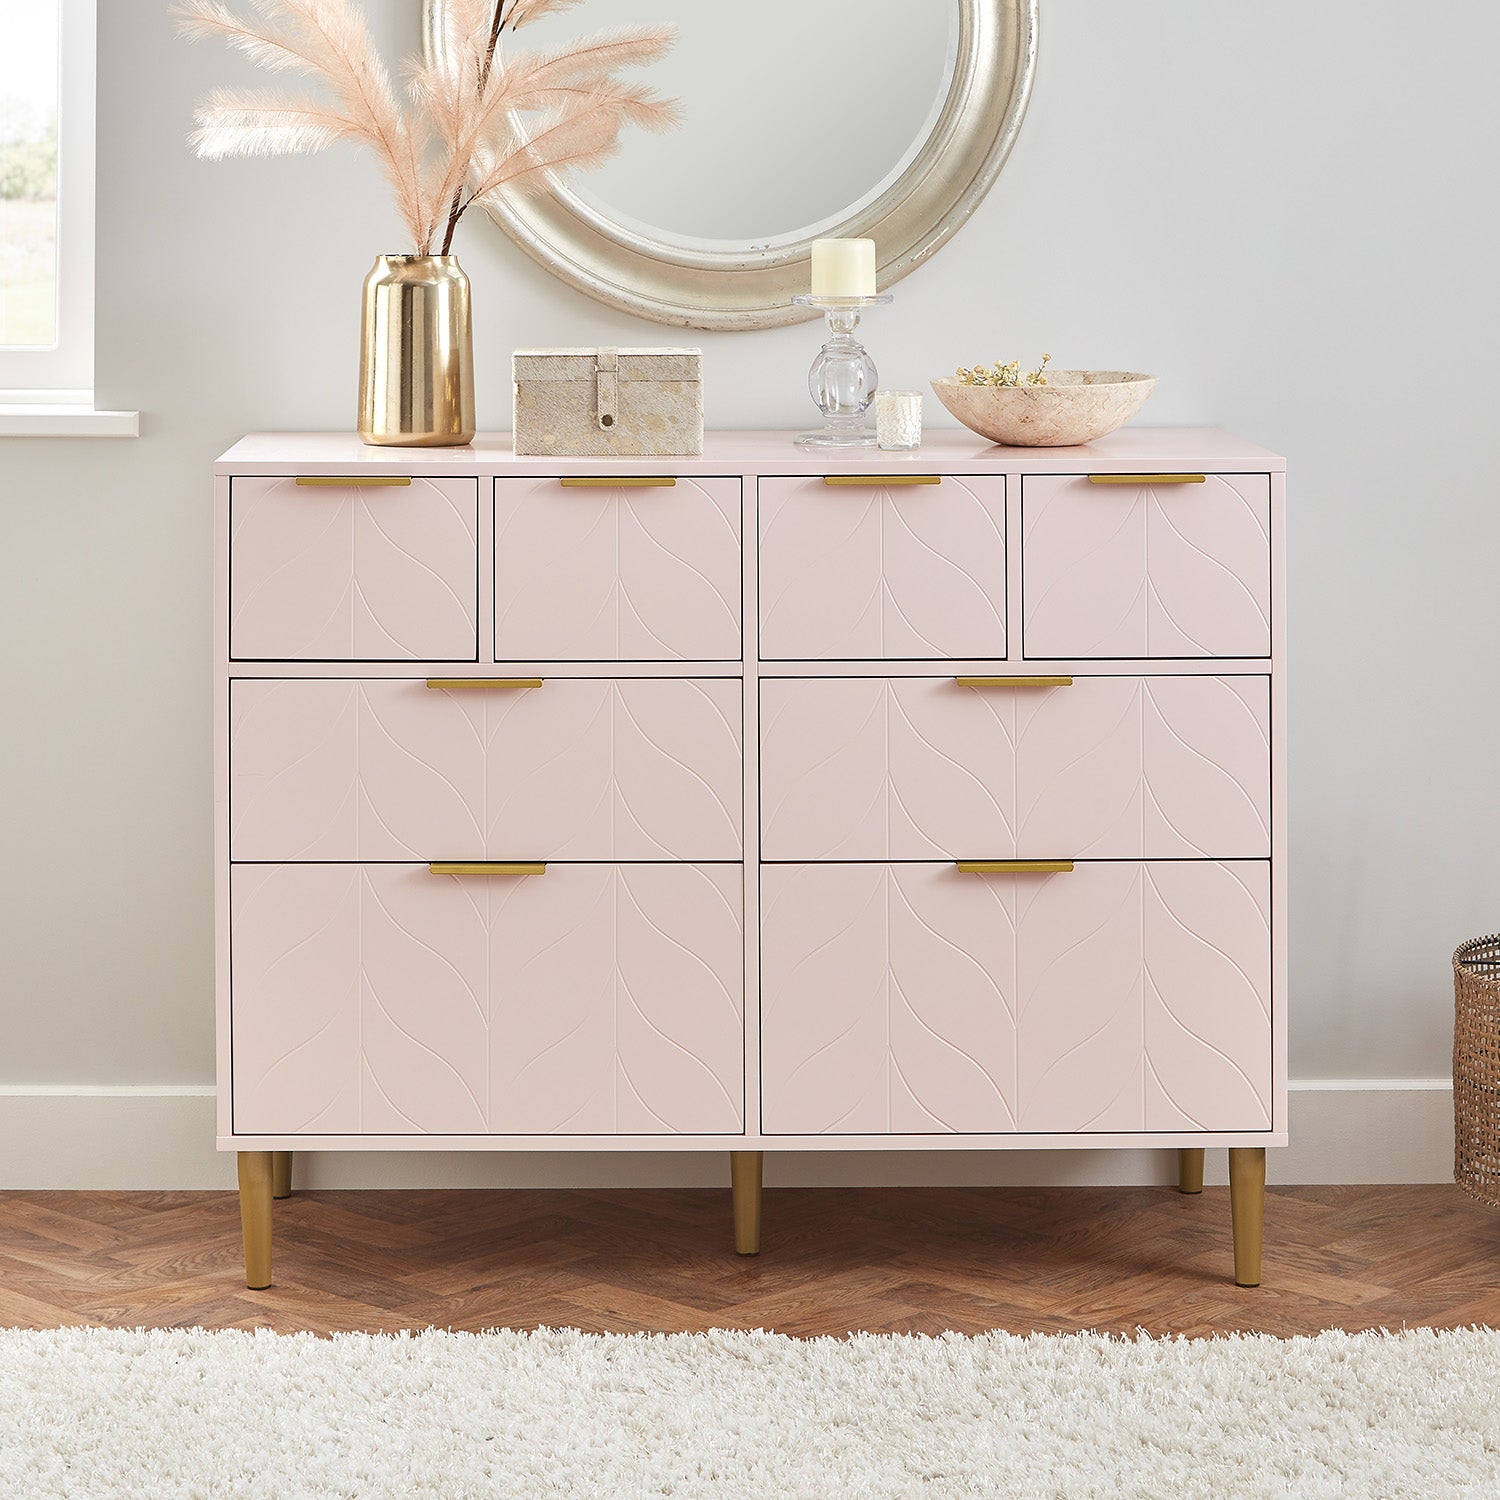 Gloria 4 piece bedroom furniture set - 4 over 4 chest of drawers - pale pink - Laura James